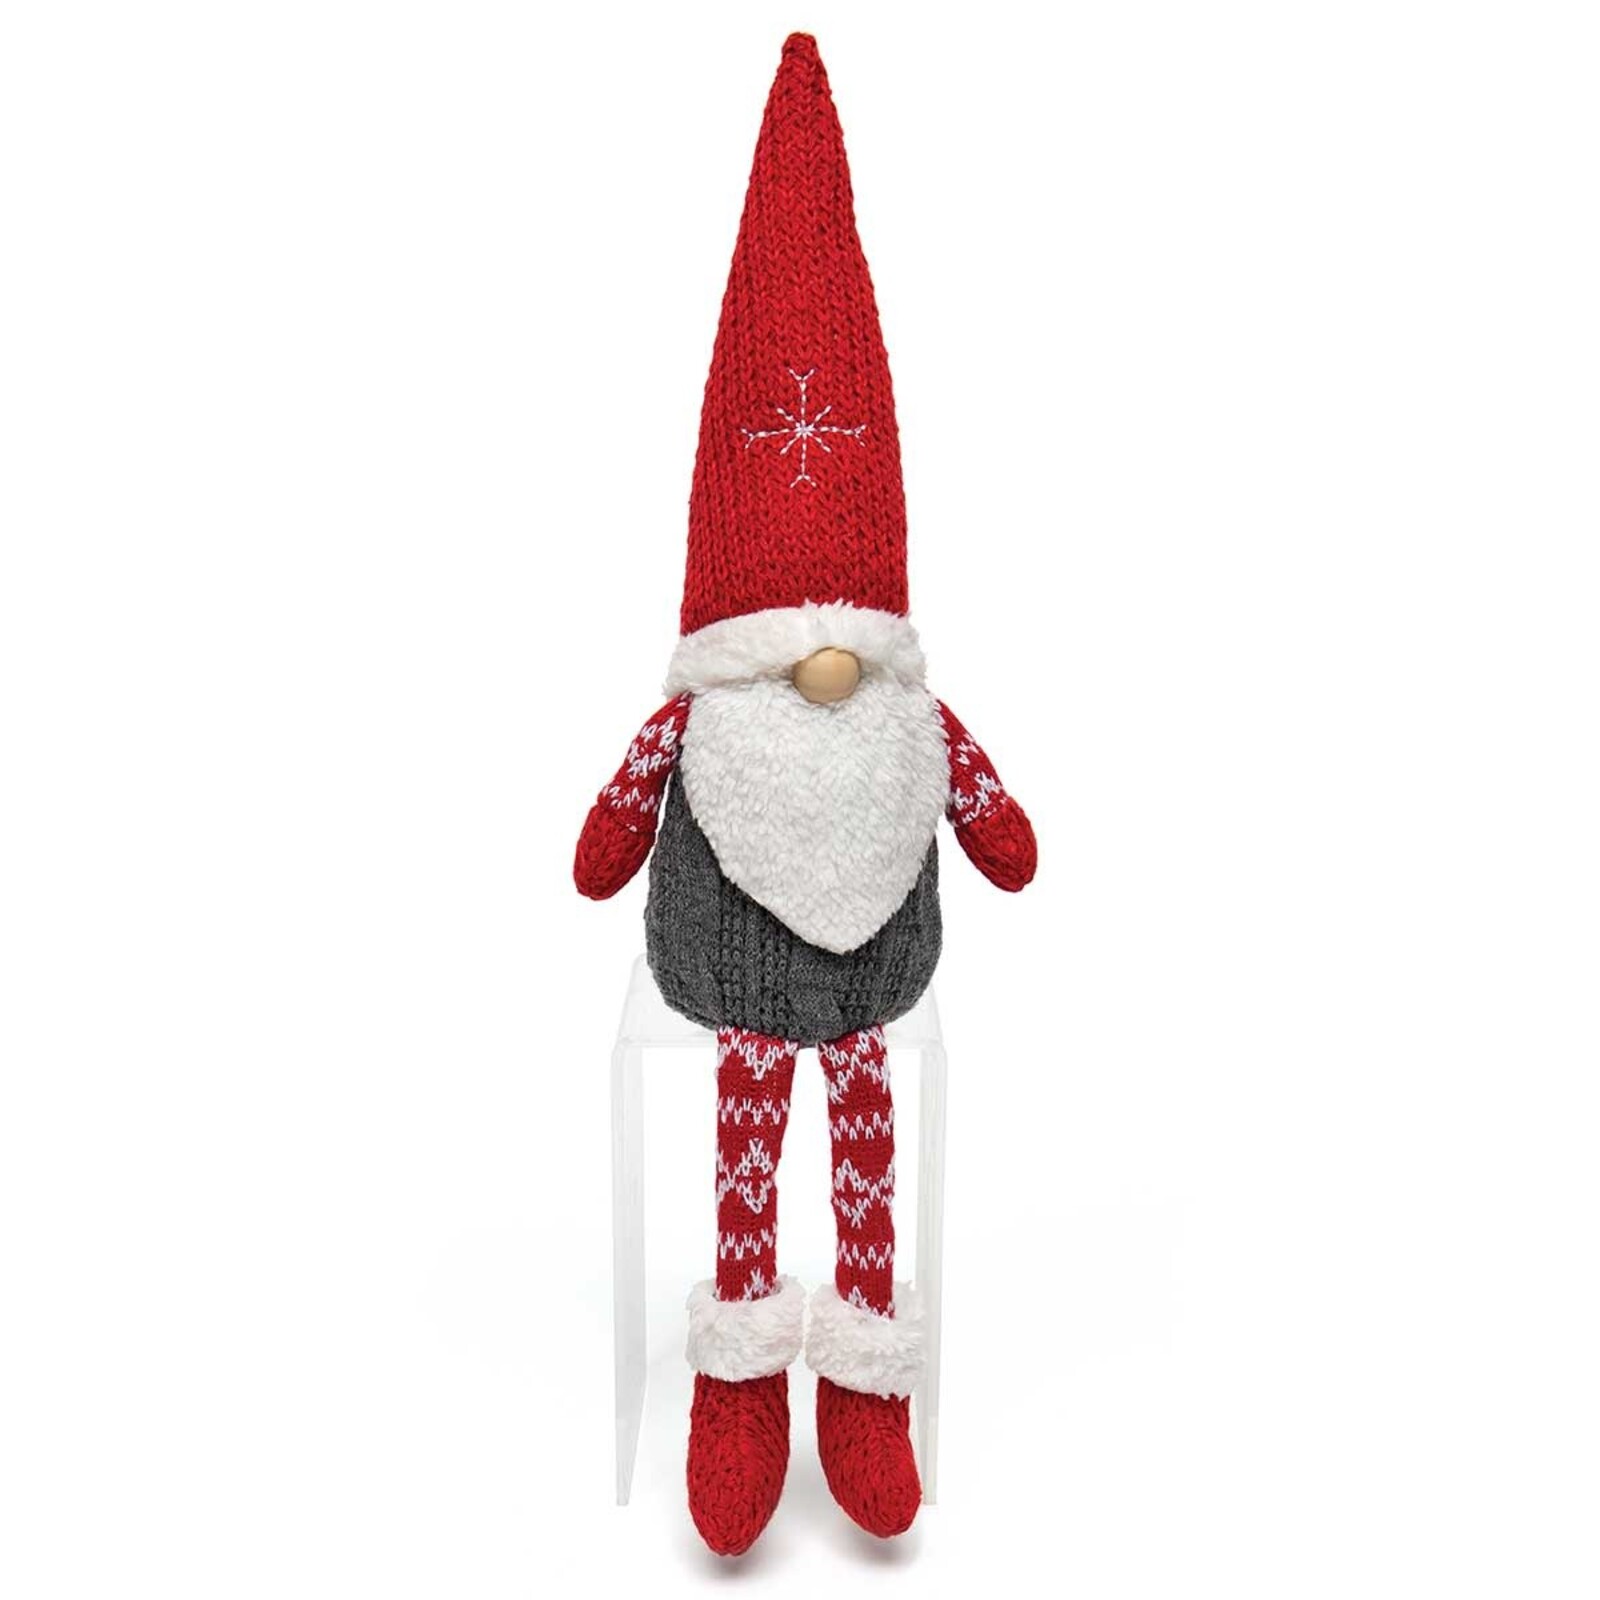 Meravic SWEDE GNOME RED/GREY WITH SWEATER HAT, WOOD NOSE  17"  R8731 loading=